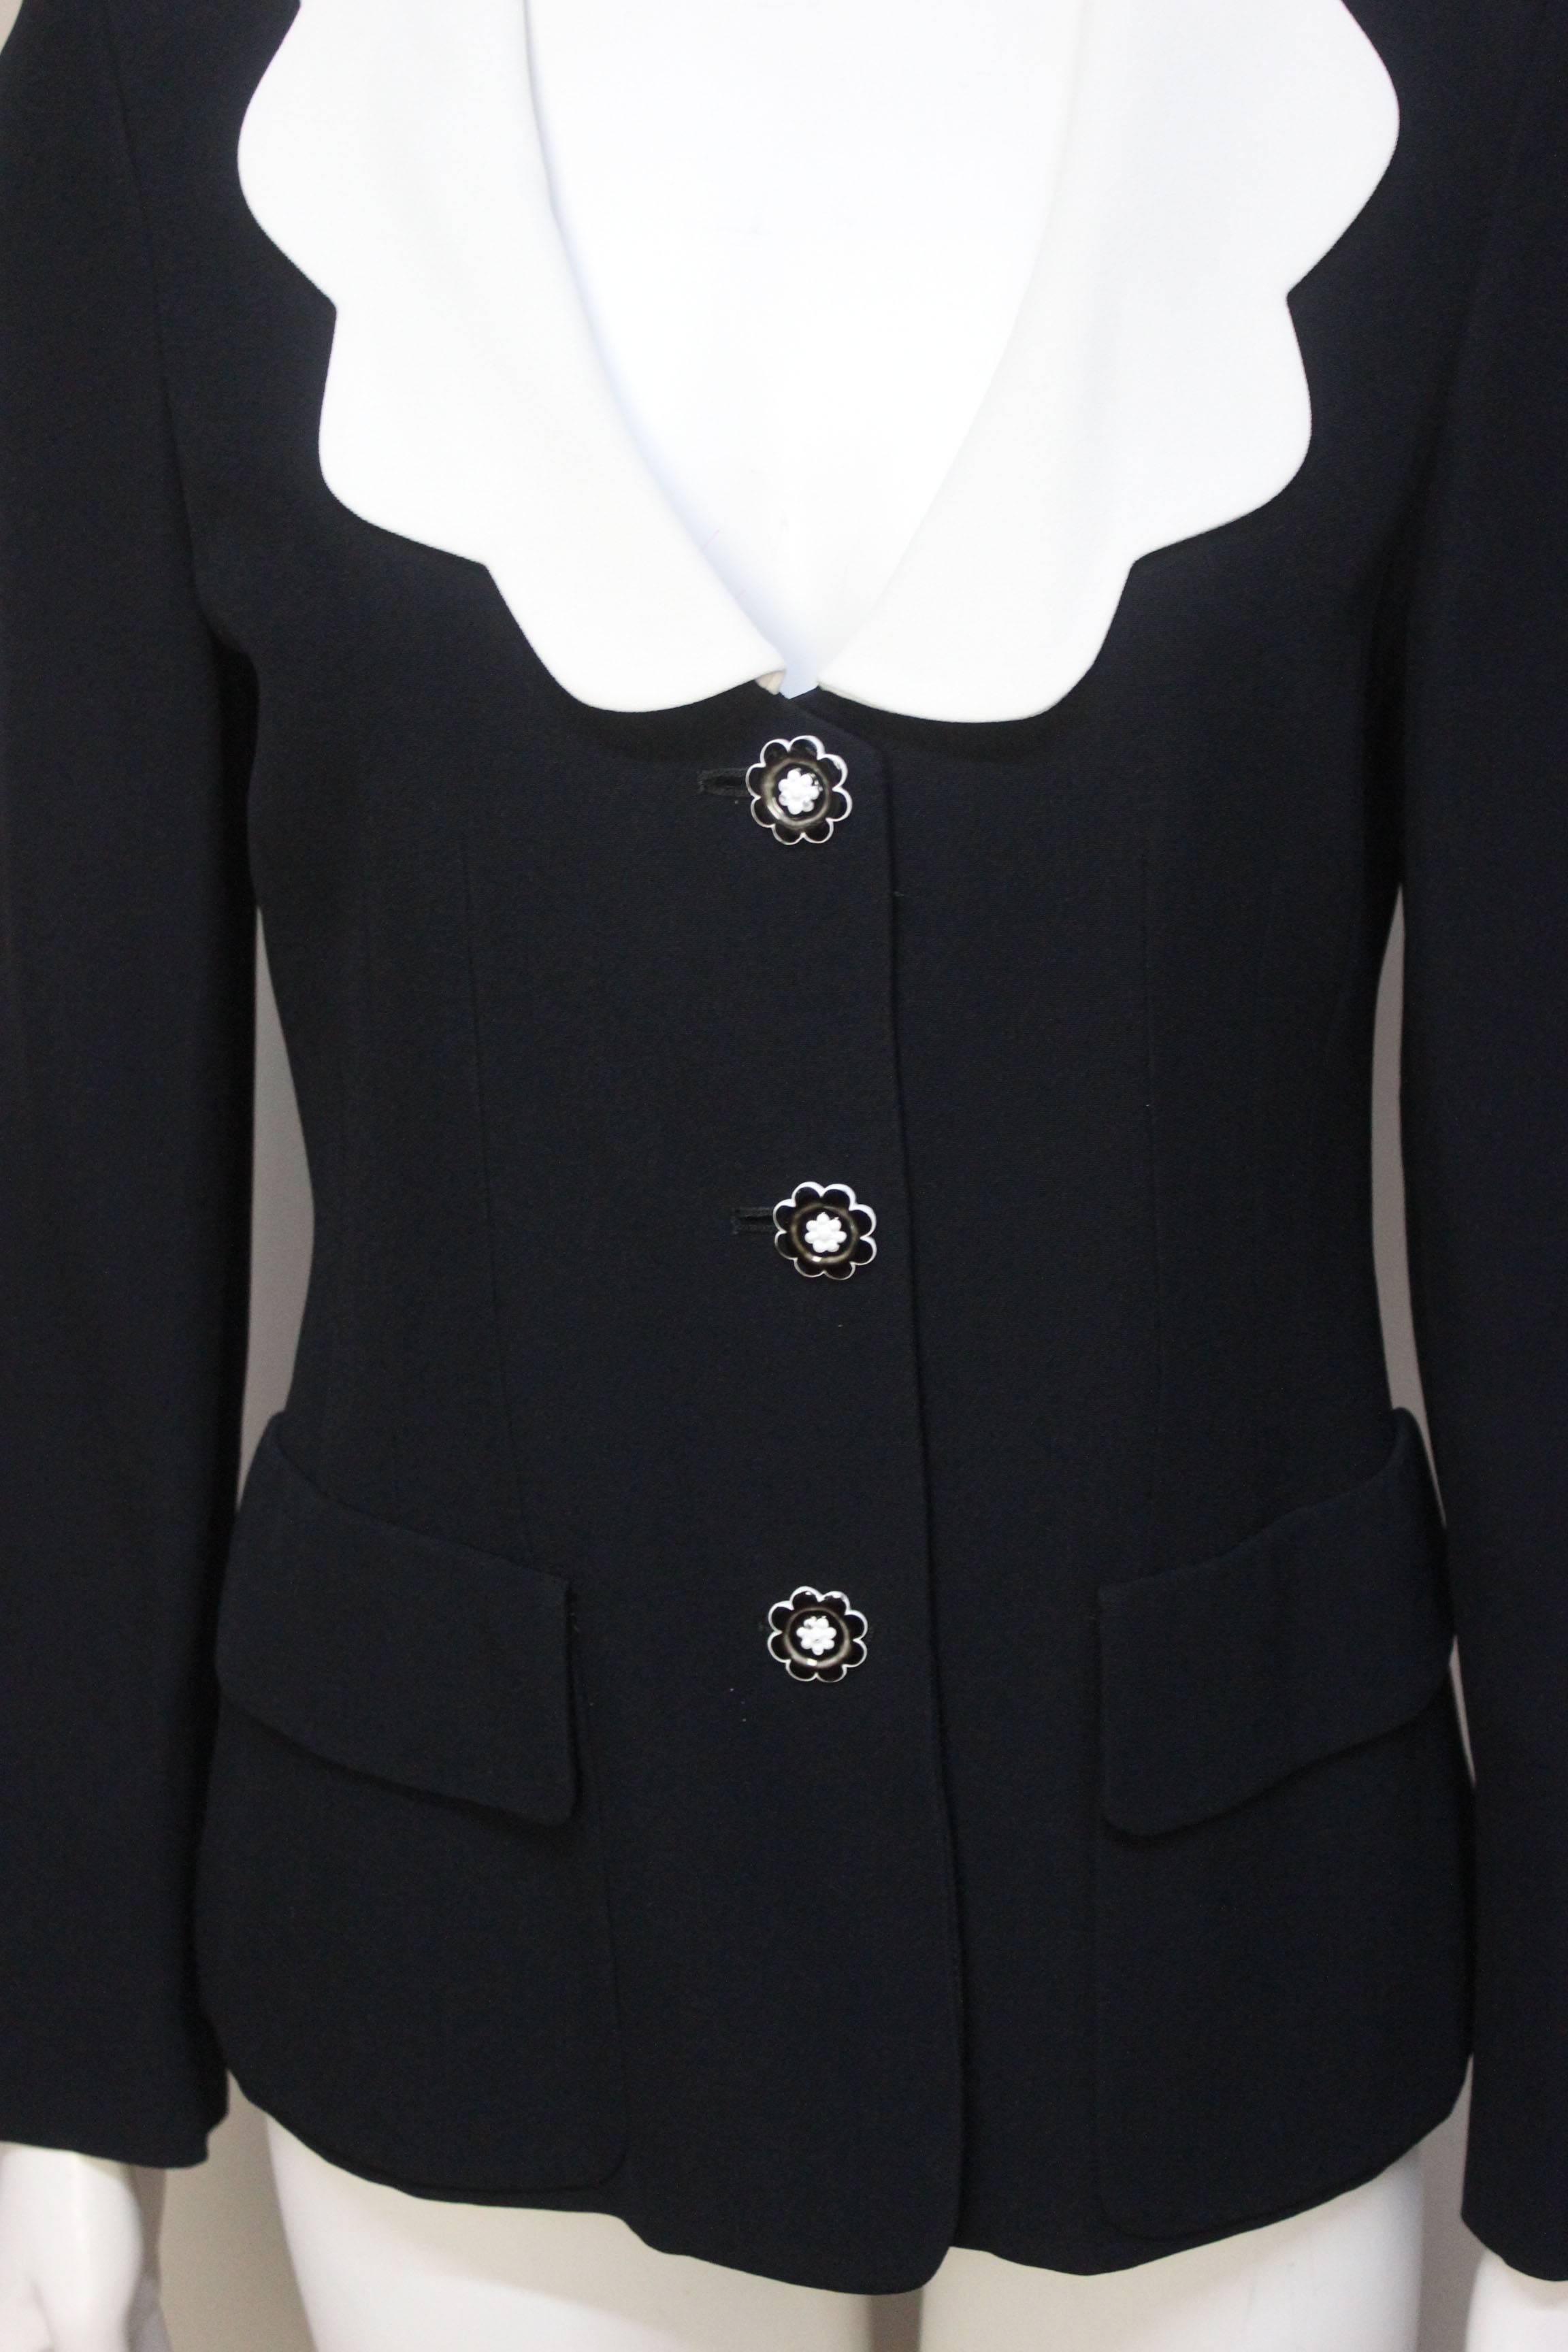 Moschino Scalloped Collar Jacket with Daisy Buttons For Sale 2